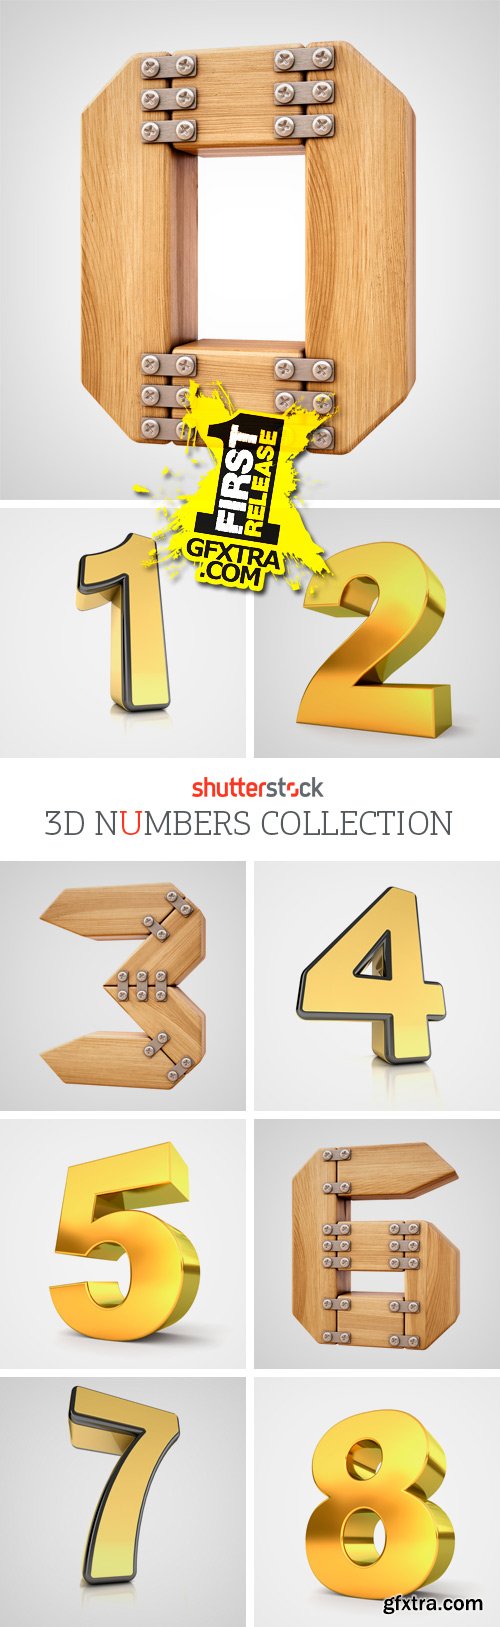 Amazing SS - 3D Numbers Collection, 30xJPGs